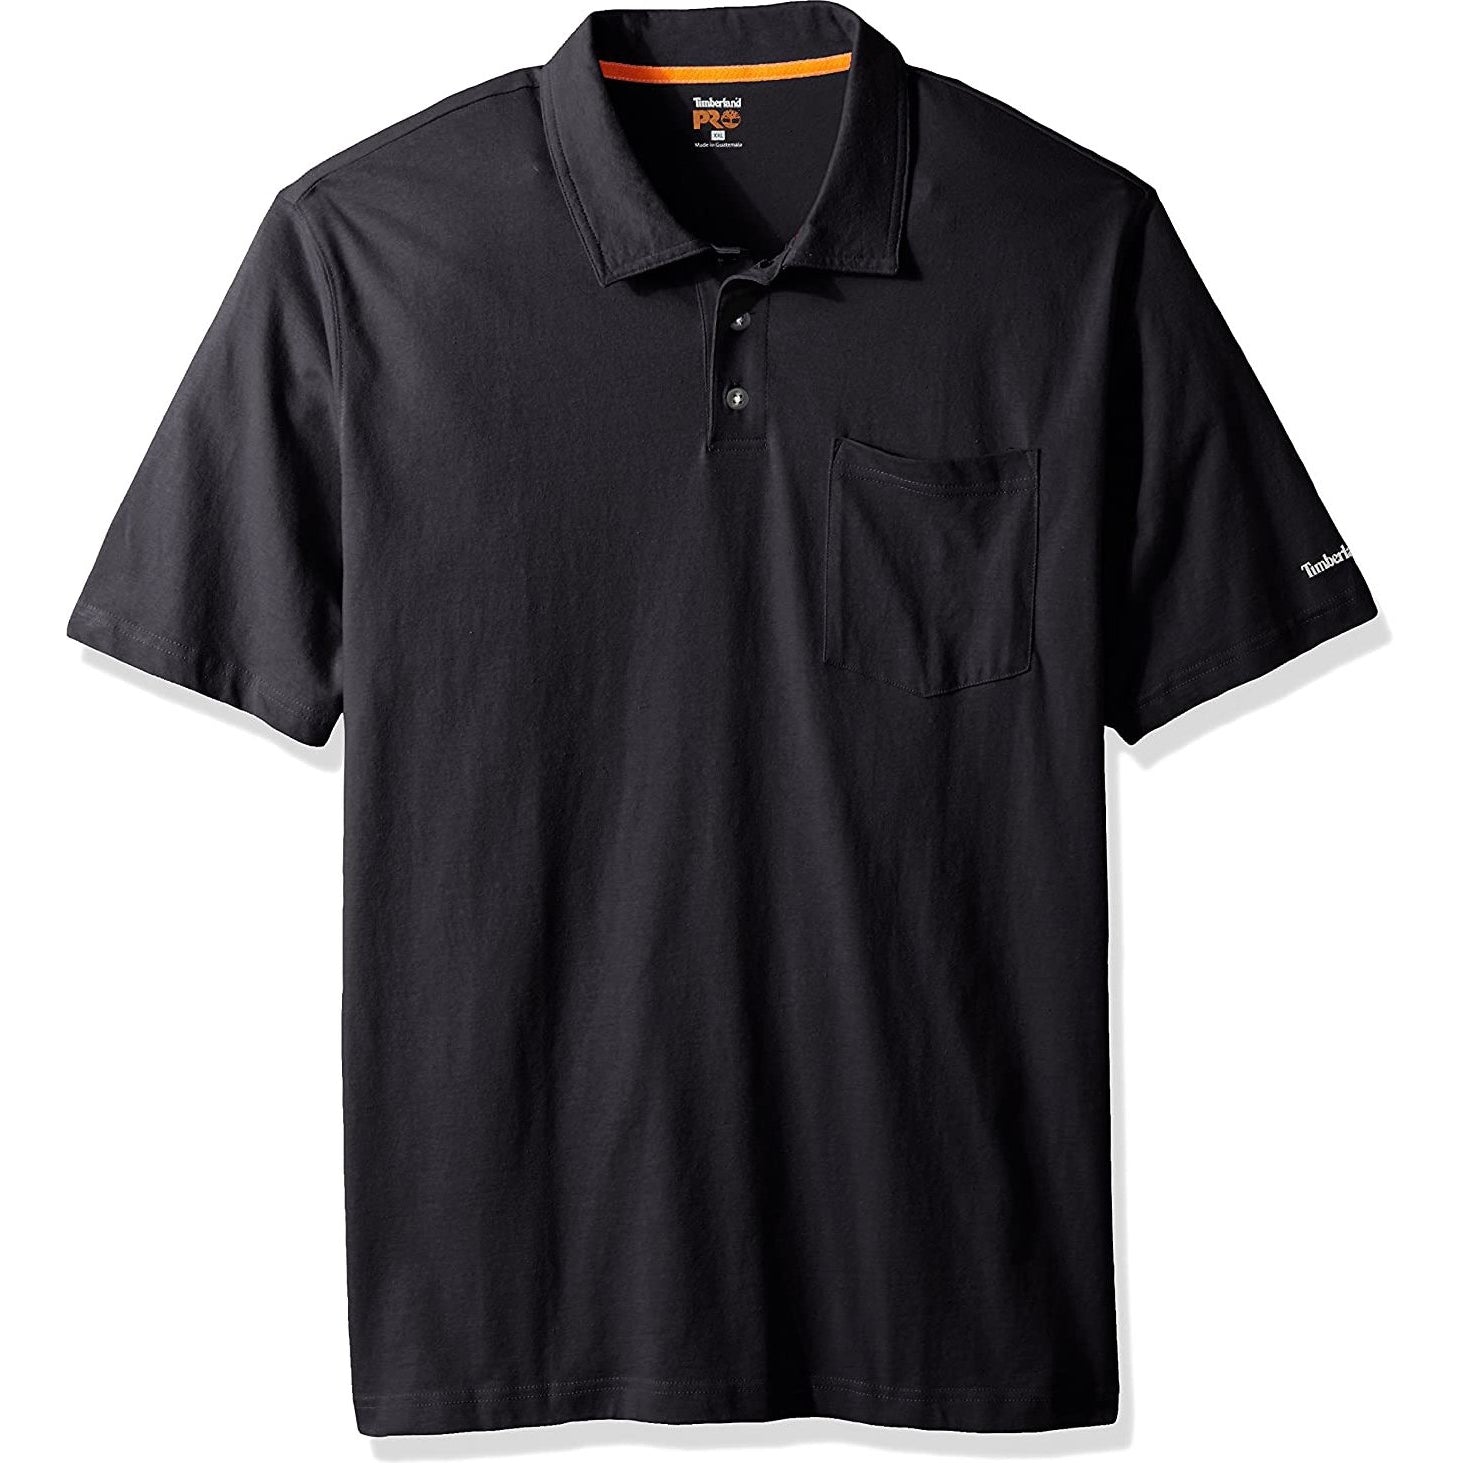 Timberland Pro Men's Base Plate Blended Short Sleeve Work Polo - Dark Navy - TB0A1HP2 Small / Navy - Overlook Boots